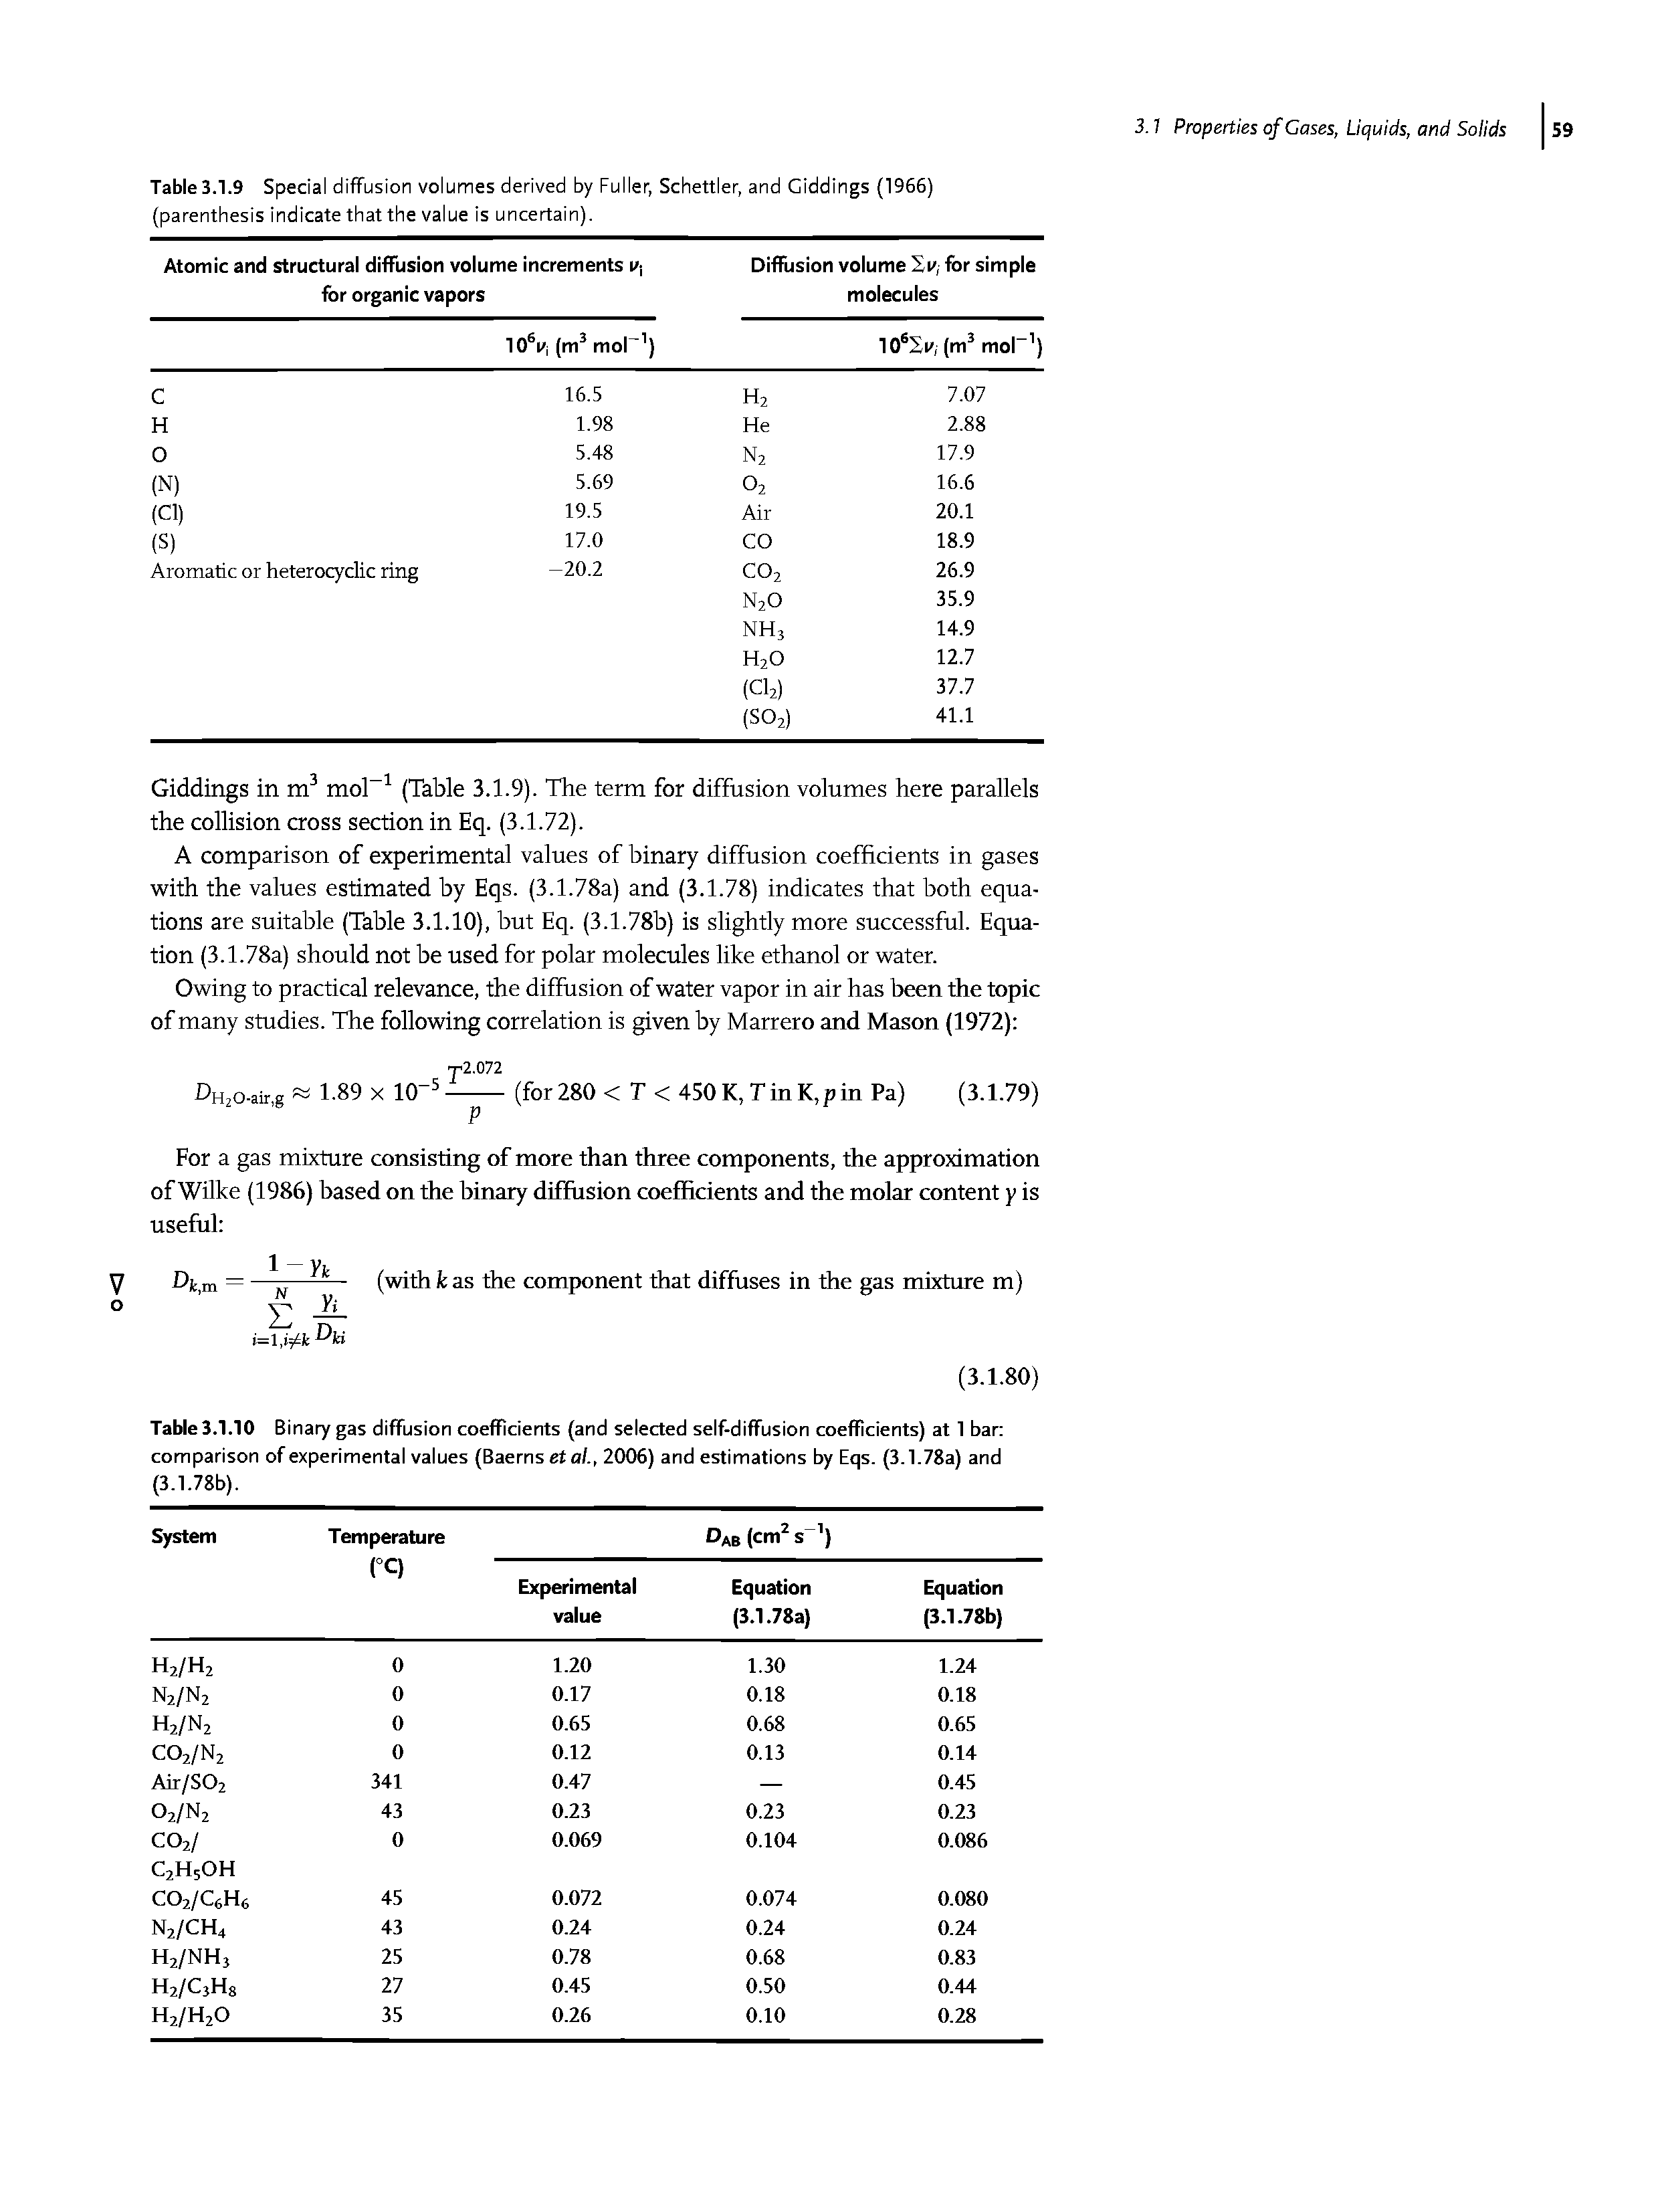 Table 3.1.10 Binary gas diffusion coefficients (and selected self-diffusion coefficients) at 1 bar comparison of experimental values (Baernseta/., 2006) and estimations by Eqs. (3.1.78a) and (3.1.78b).